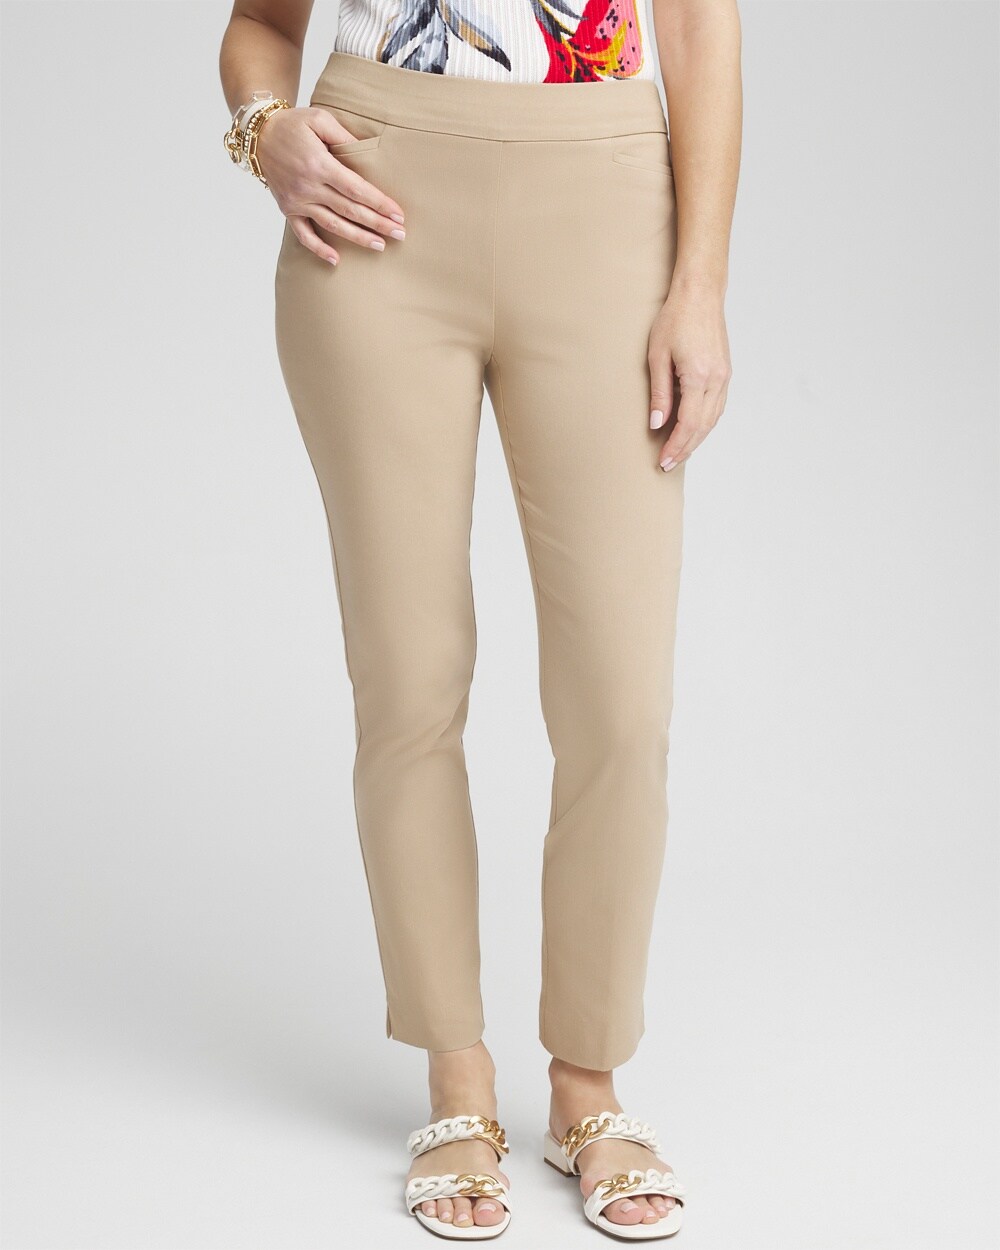 Chico's Brigitte Basic Slit Ankle Pants In Sycamore